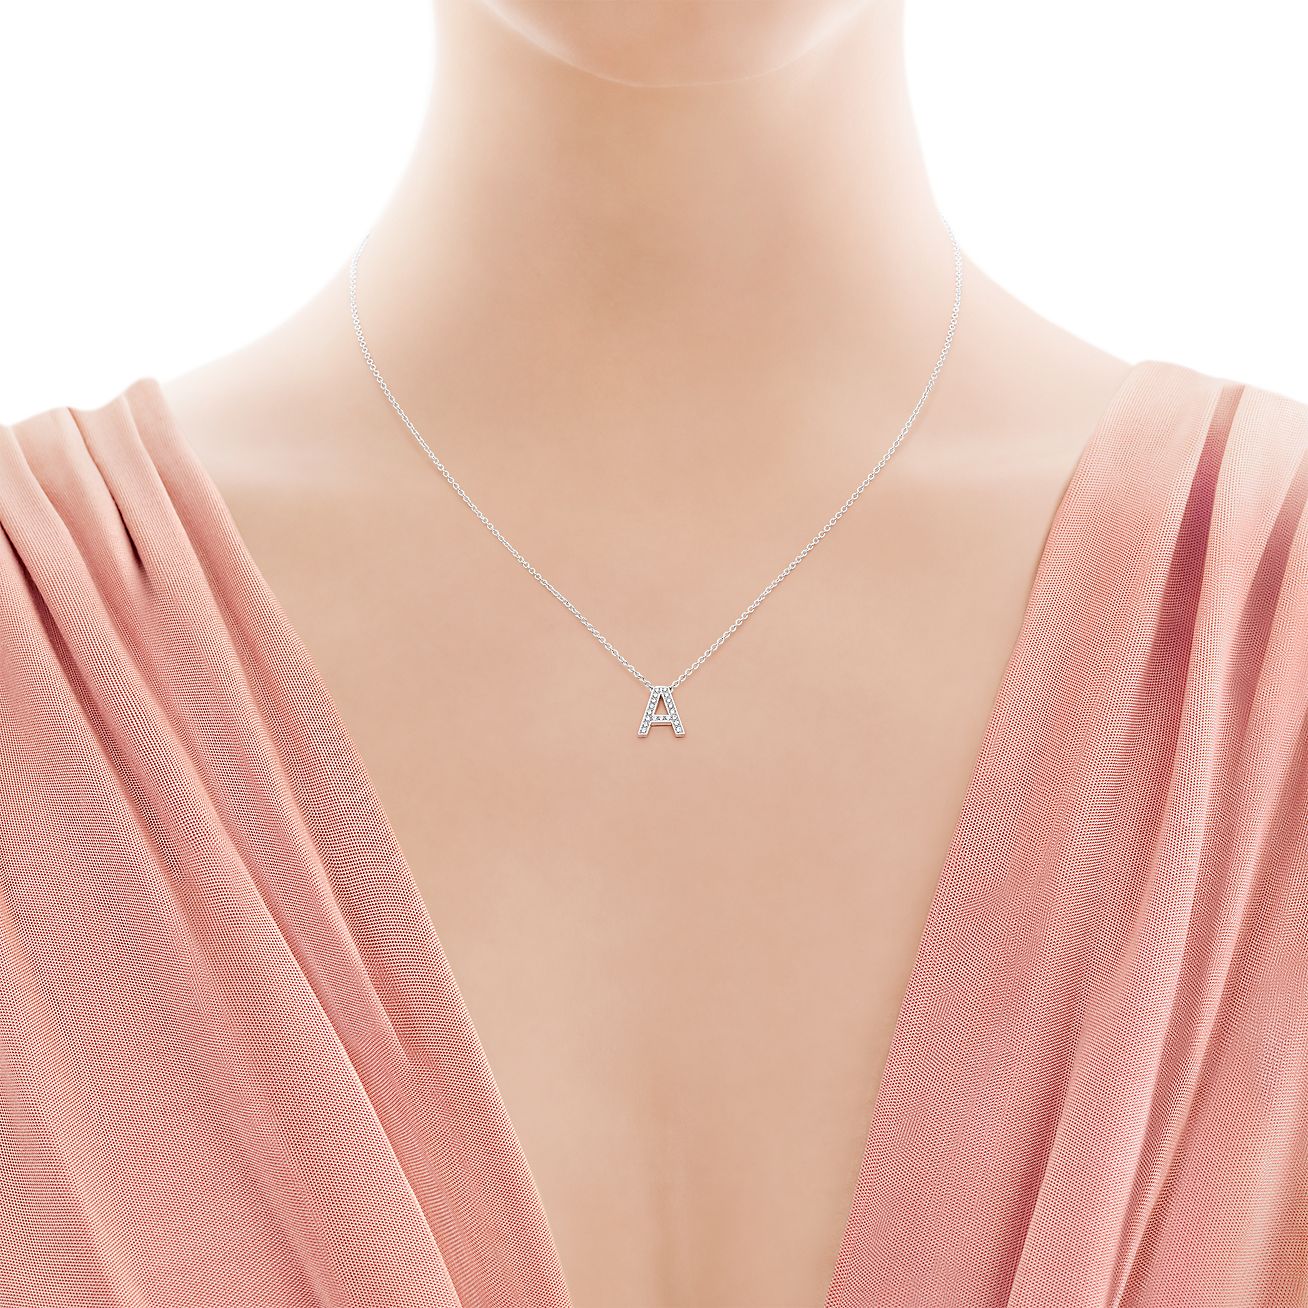 tiffany two carat pendant necklace